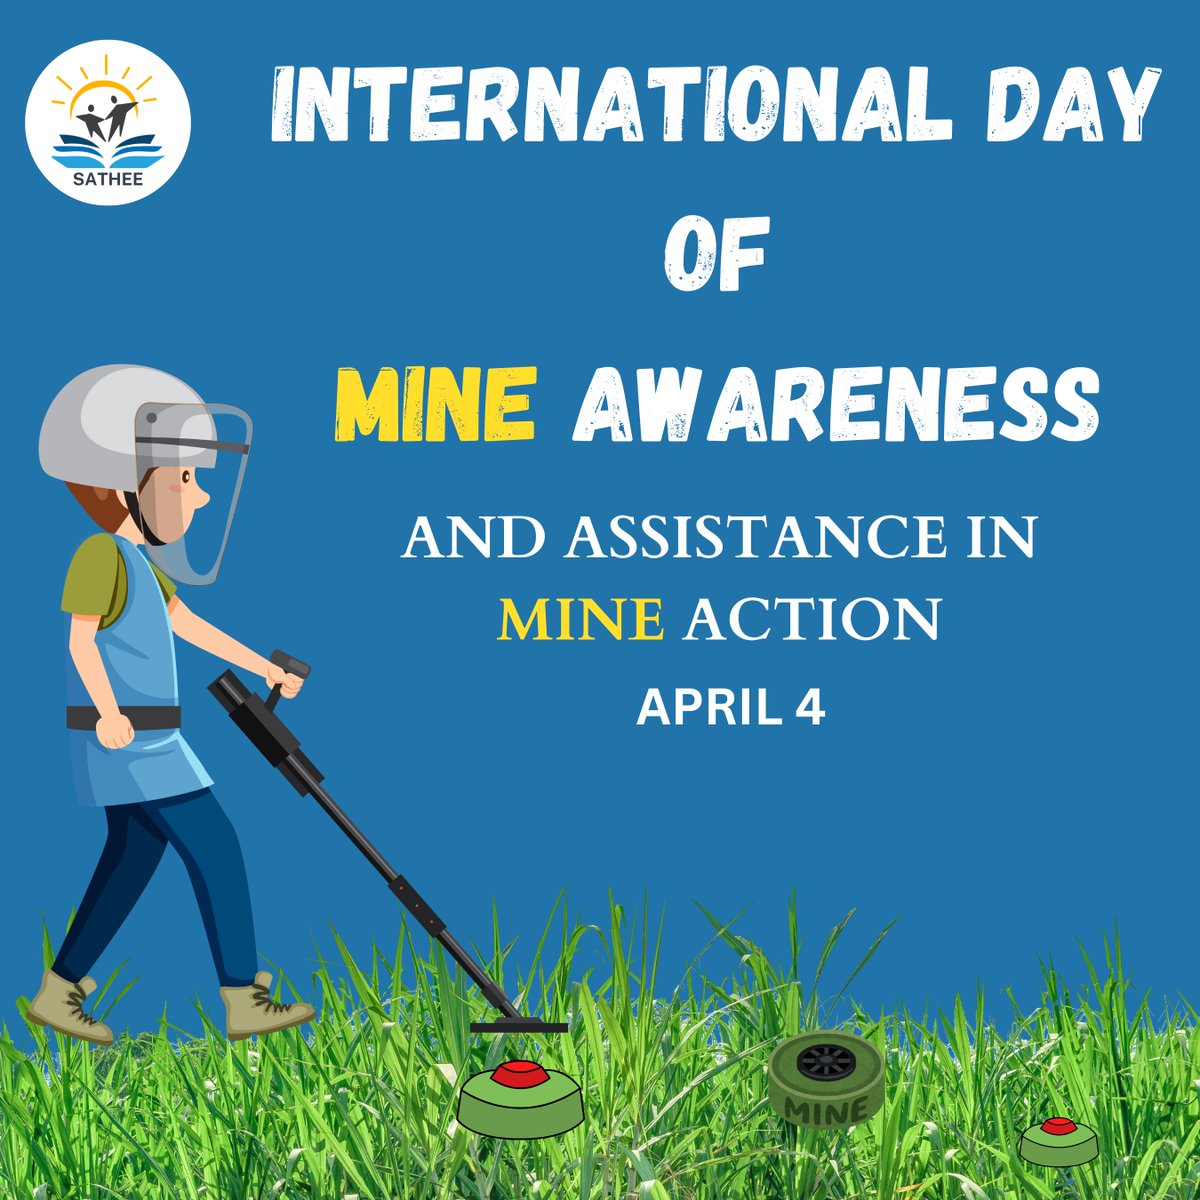 Did you know? Millions of people live in fear of landmines. On this International Day of Mine Awareness, learn more and support organizations working to clear them.
#InternationalDayofMineAwareness #MineAwareness #GlobalEfforts #Landmines #MineAction #Peacebuilding #mine